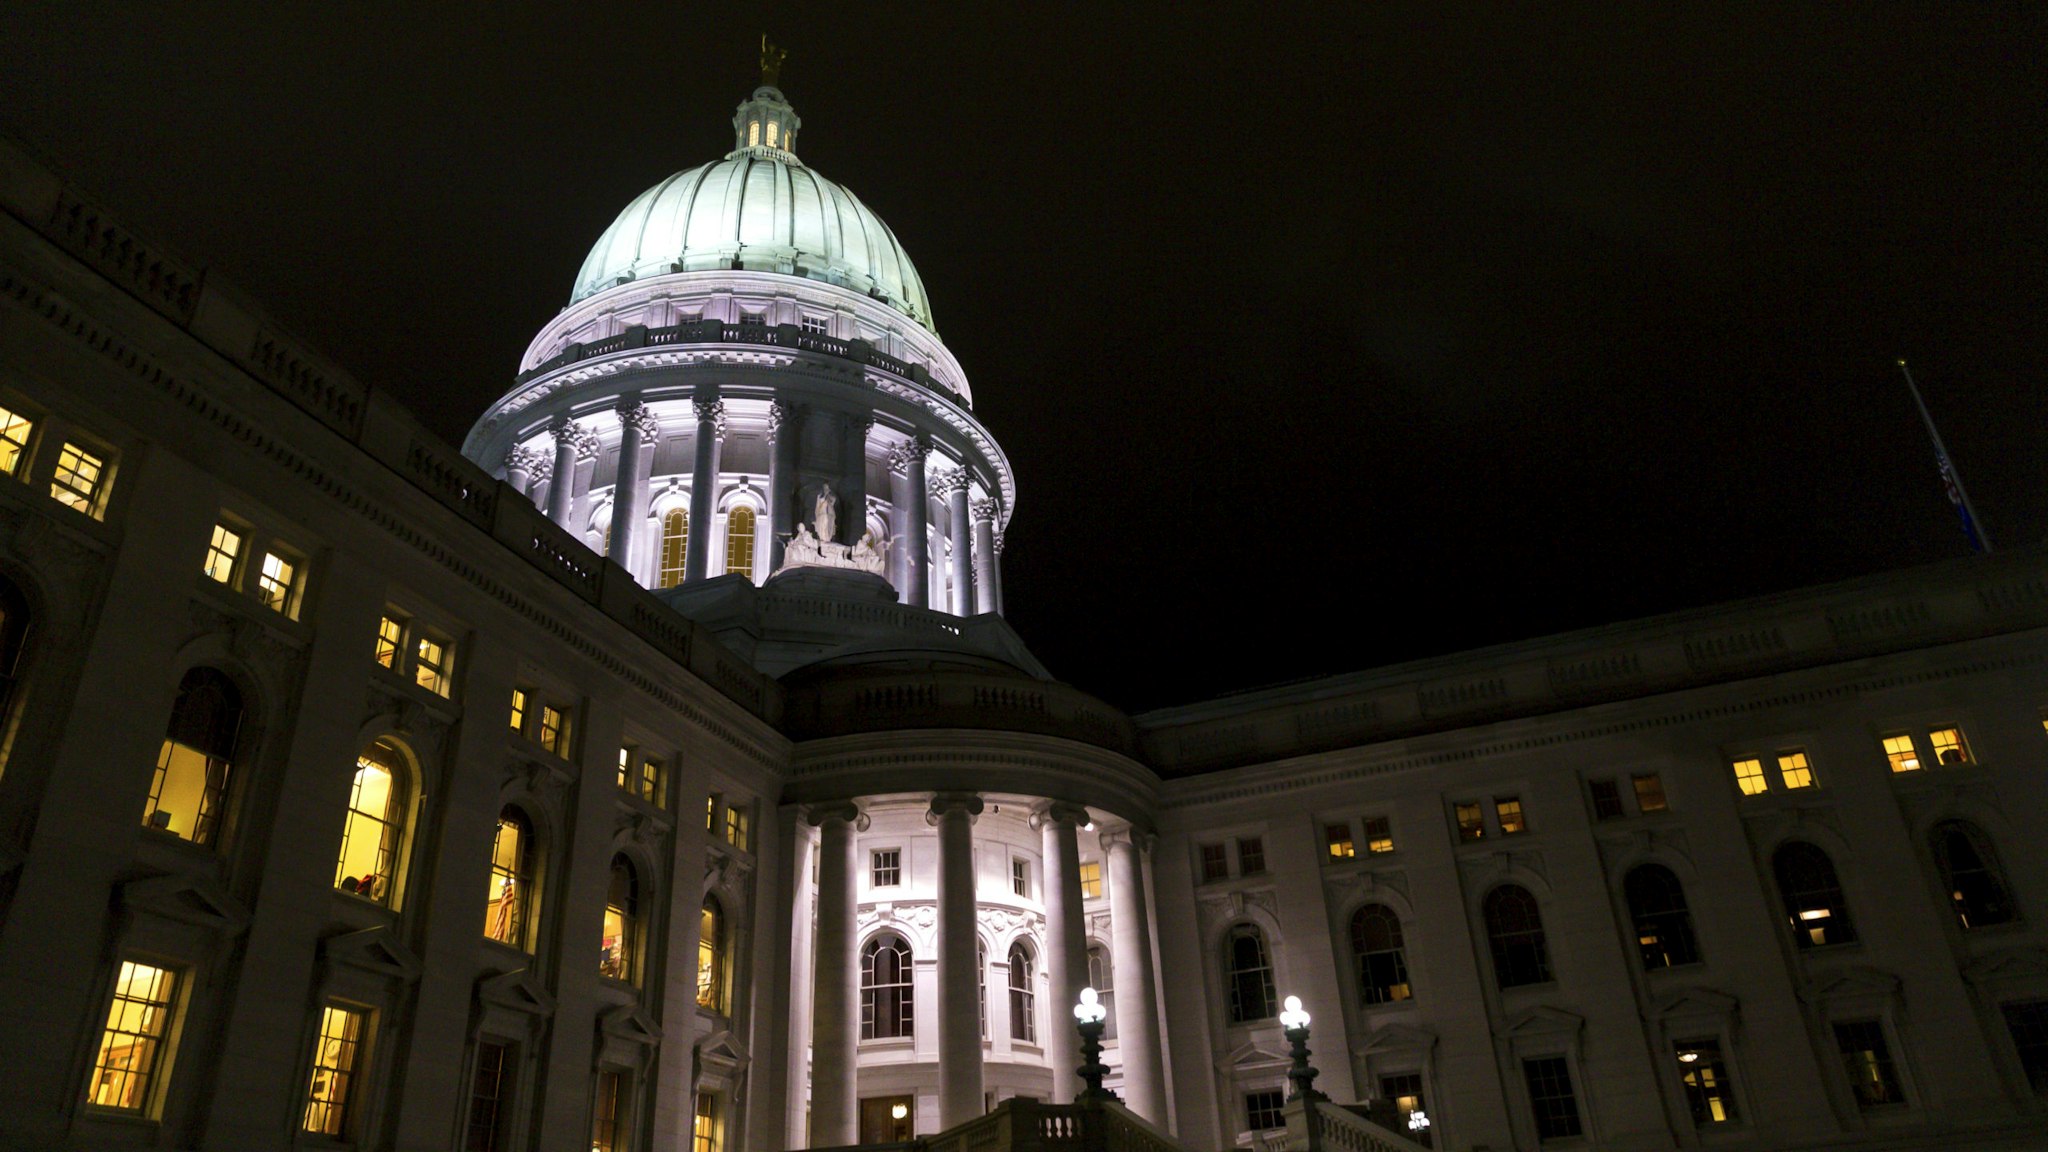 MADISON, WI - DECEMBER 04: The Wisconsin State Capitol where late night debate is taking place over contentious legislation December 4, 2018 in Madison, Wisconsin. Wisconsin Republicans are trying to pass a series of proposals that will weaken the authority of Gov.-elect Tony Evers and incoming Democratic Attorney General Josh Kaul.